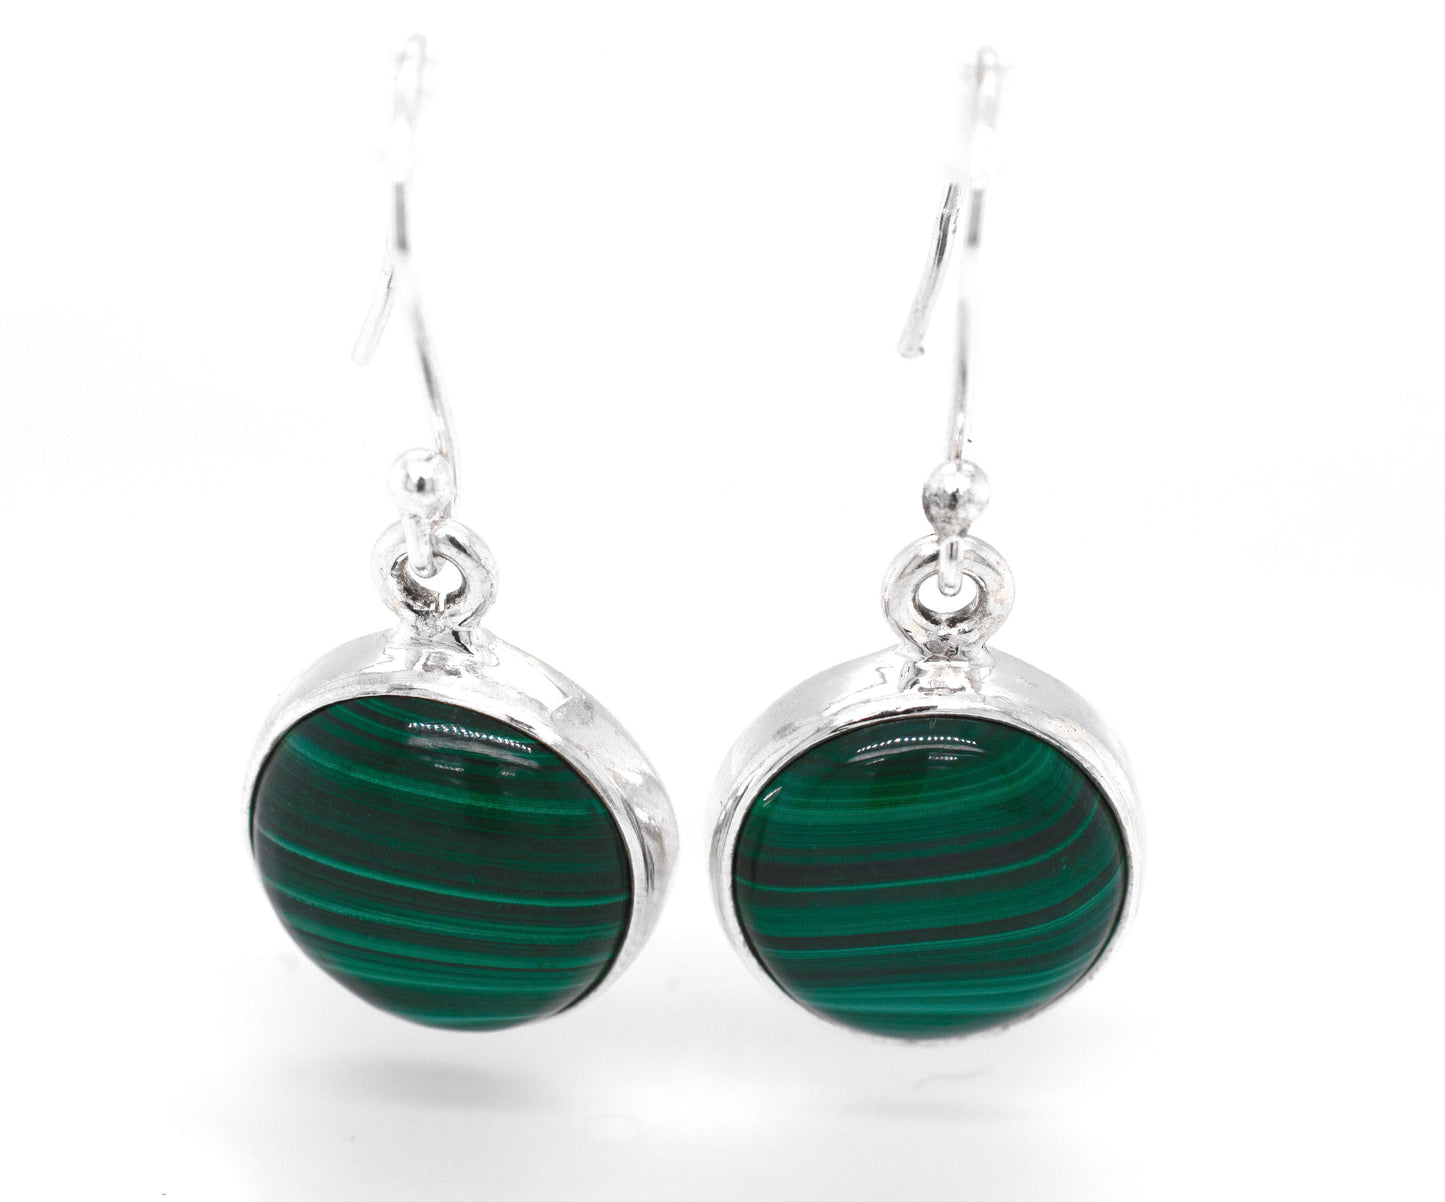 A pair of Super Silver Gorgeous Round Malachite Earrings, known for their healing properties, adorned with beautiful green malachite.